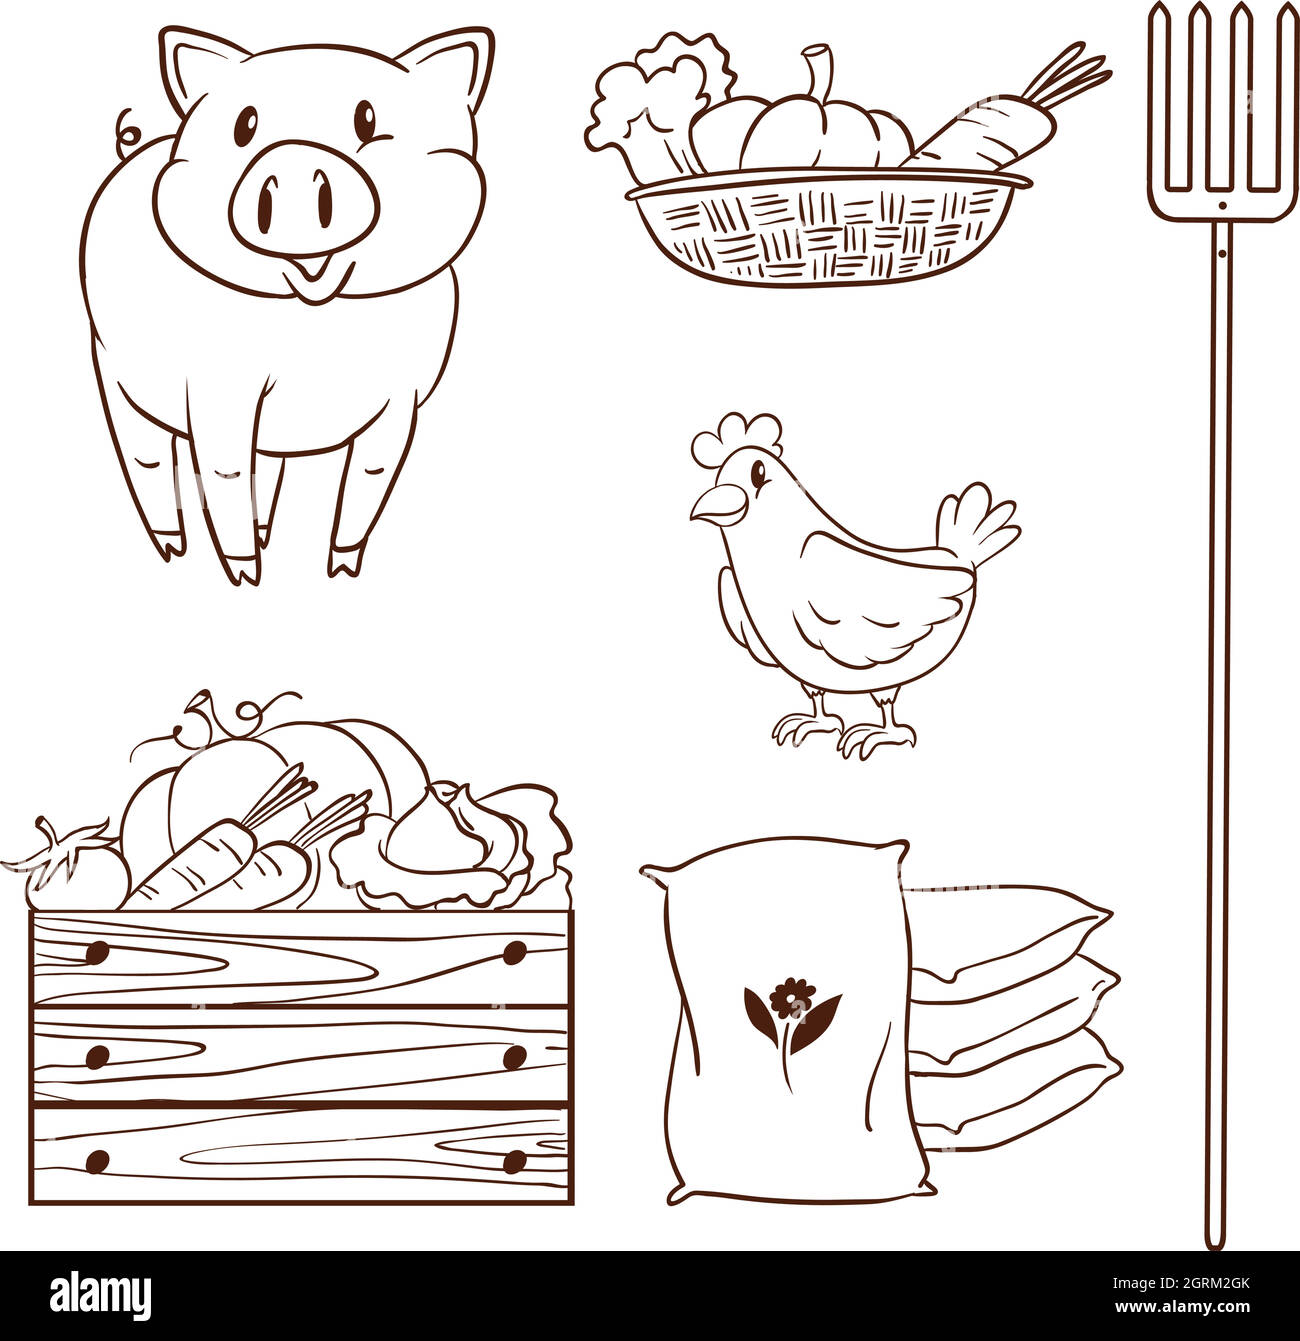 A simple sketch of the farm animals and the harvested vegetables Stock Vector